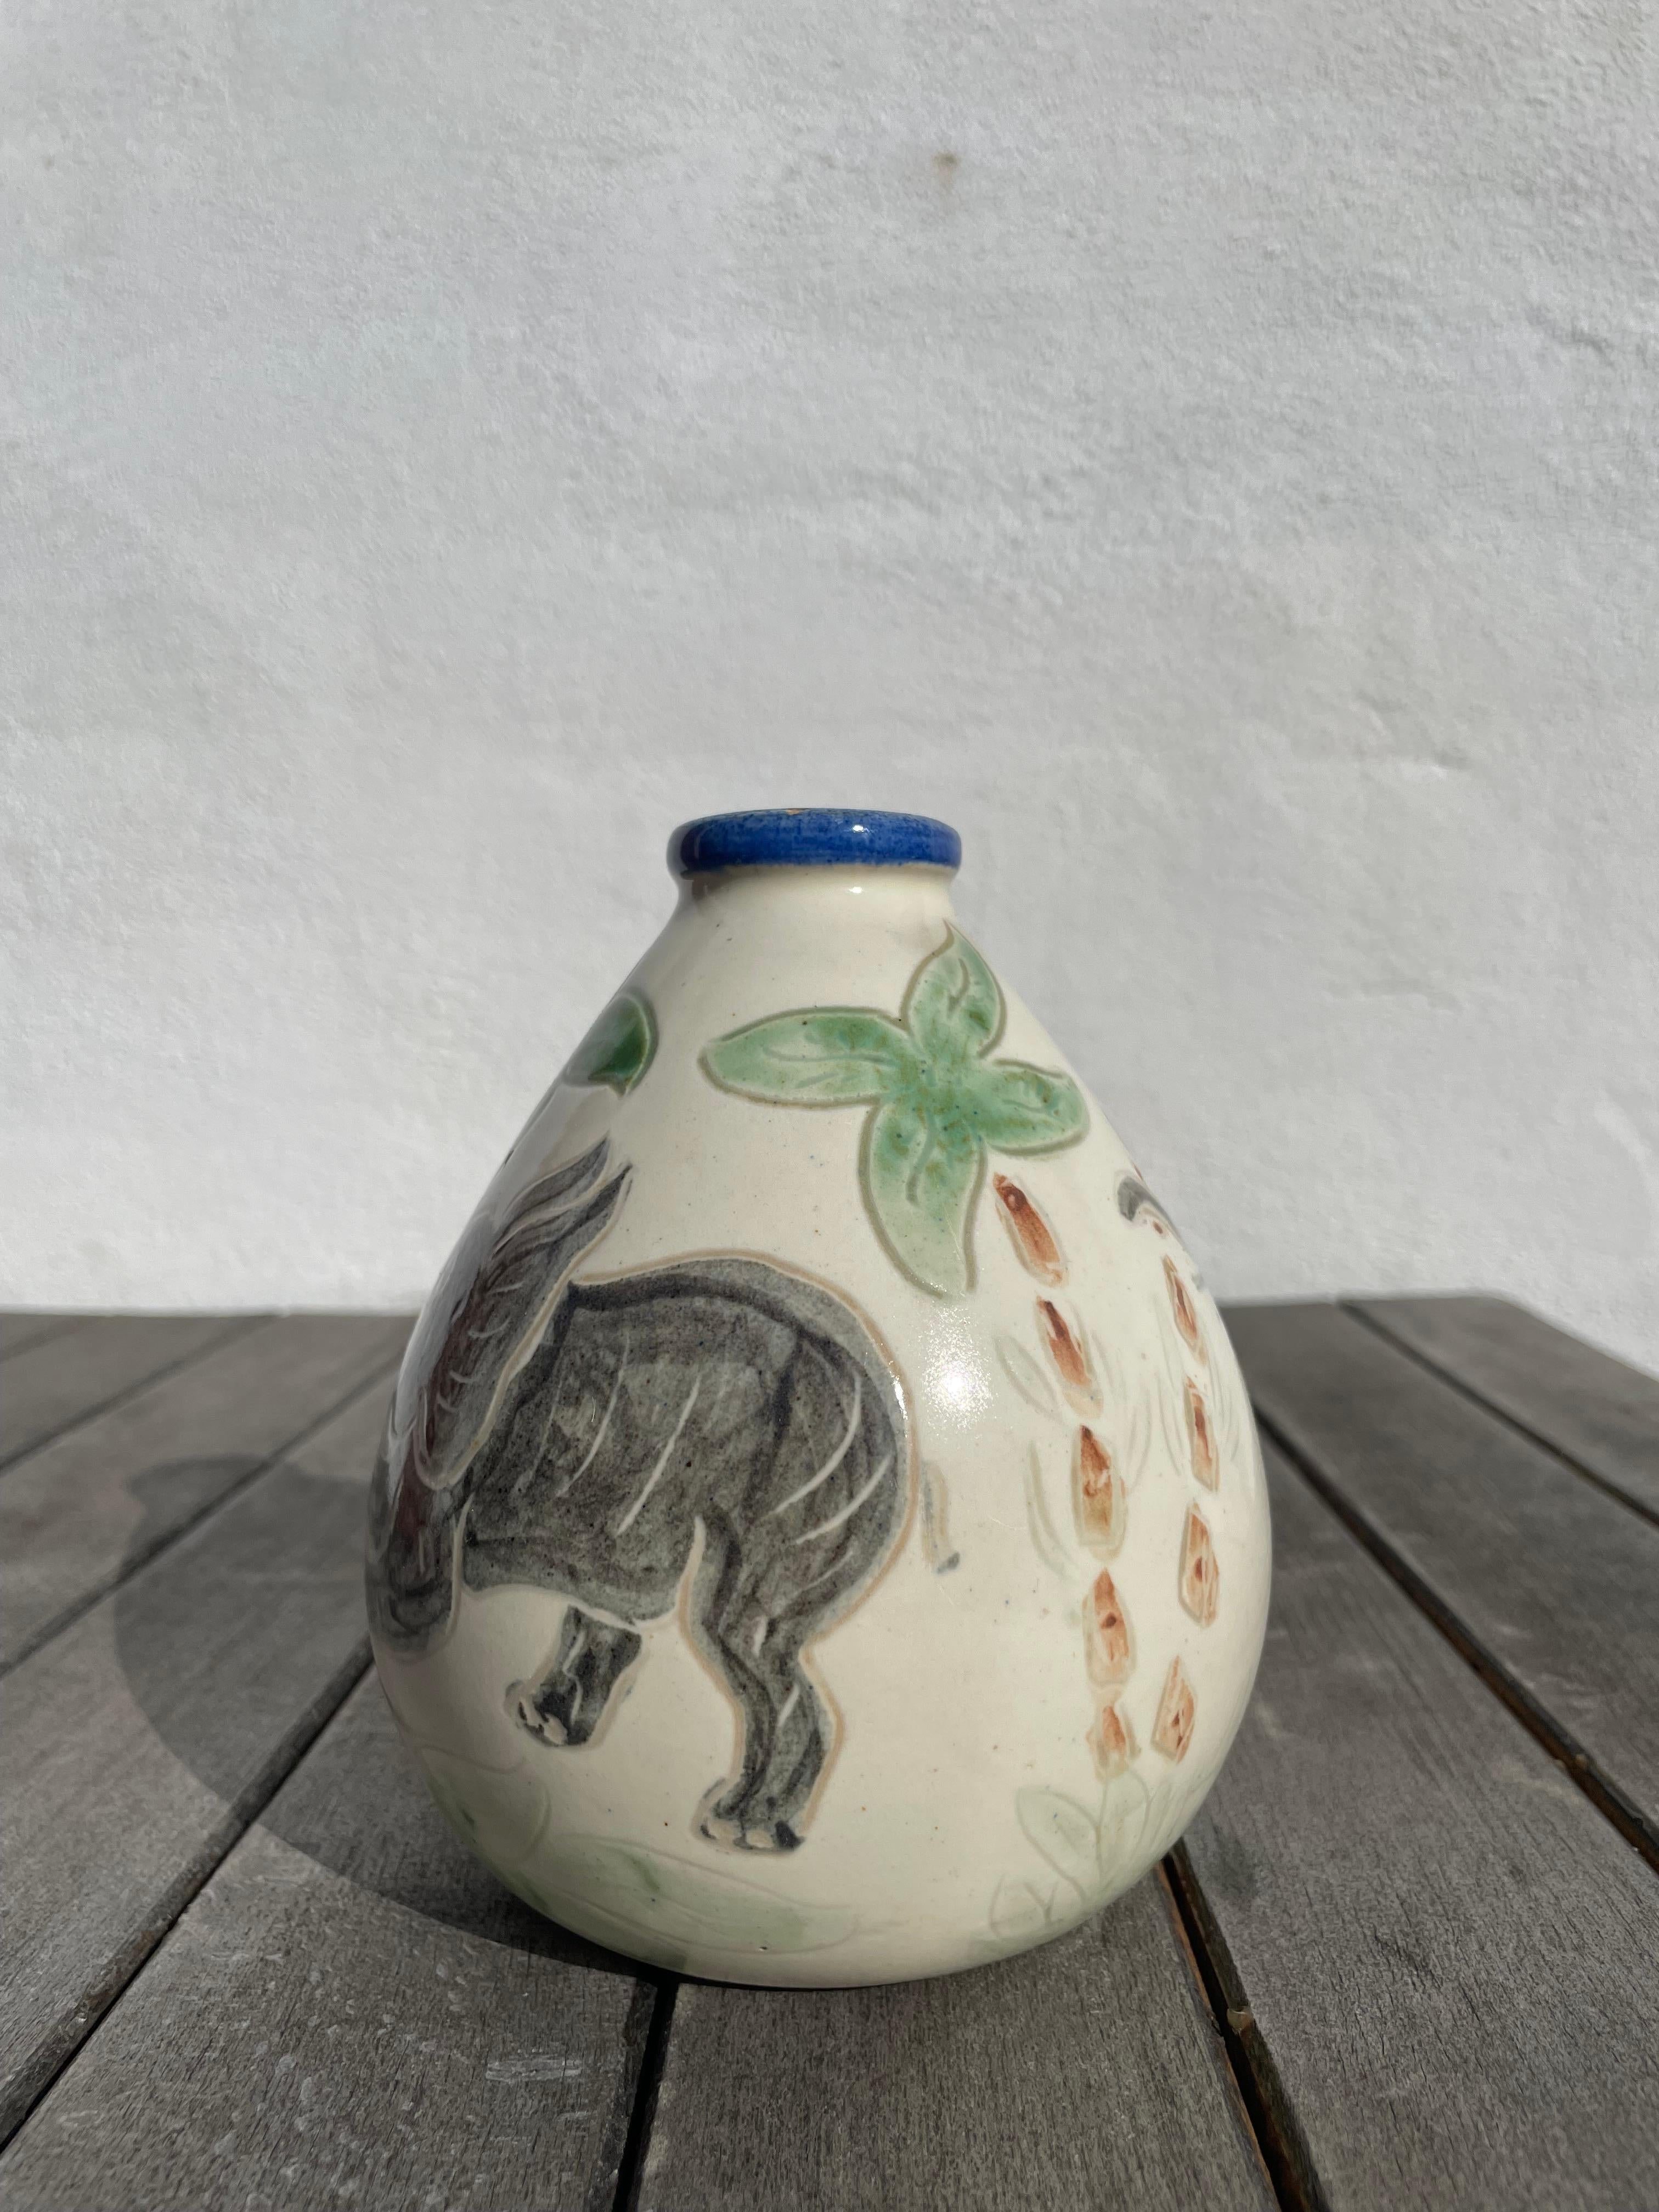 Grimstrup Hand-Decorated Vase with Elephants, Palmtrees, Leaves, 1950s In Good Condition For Sale In Copenhagen, DK